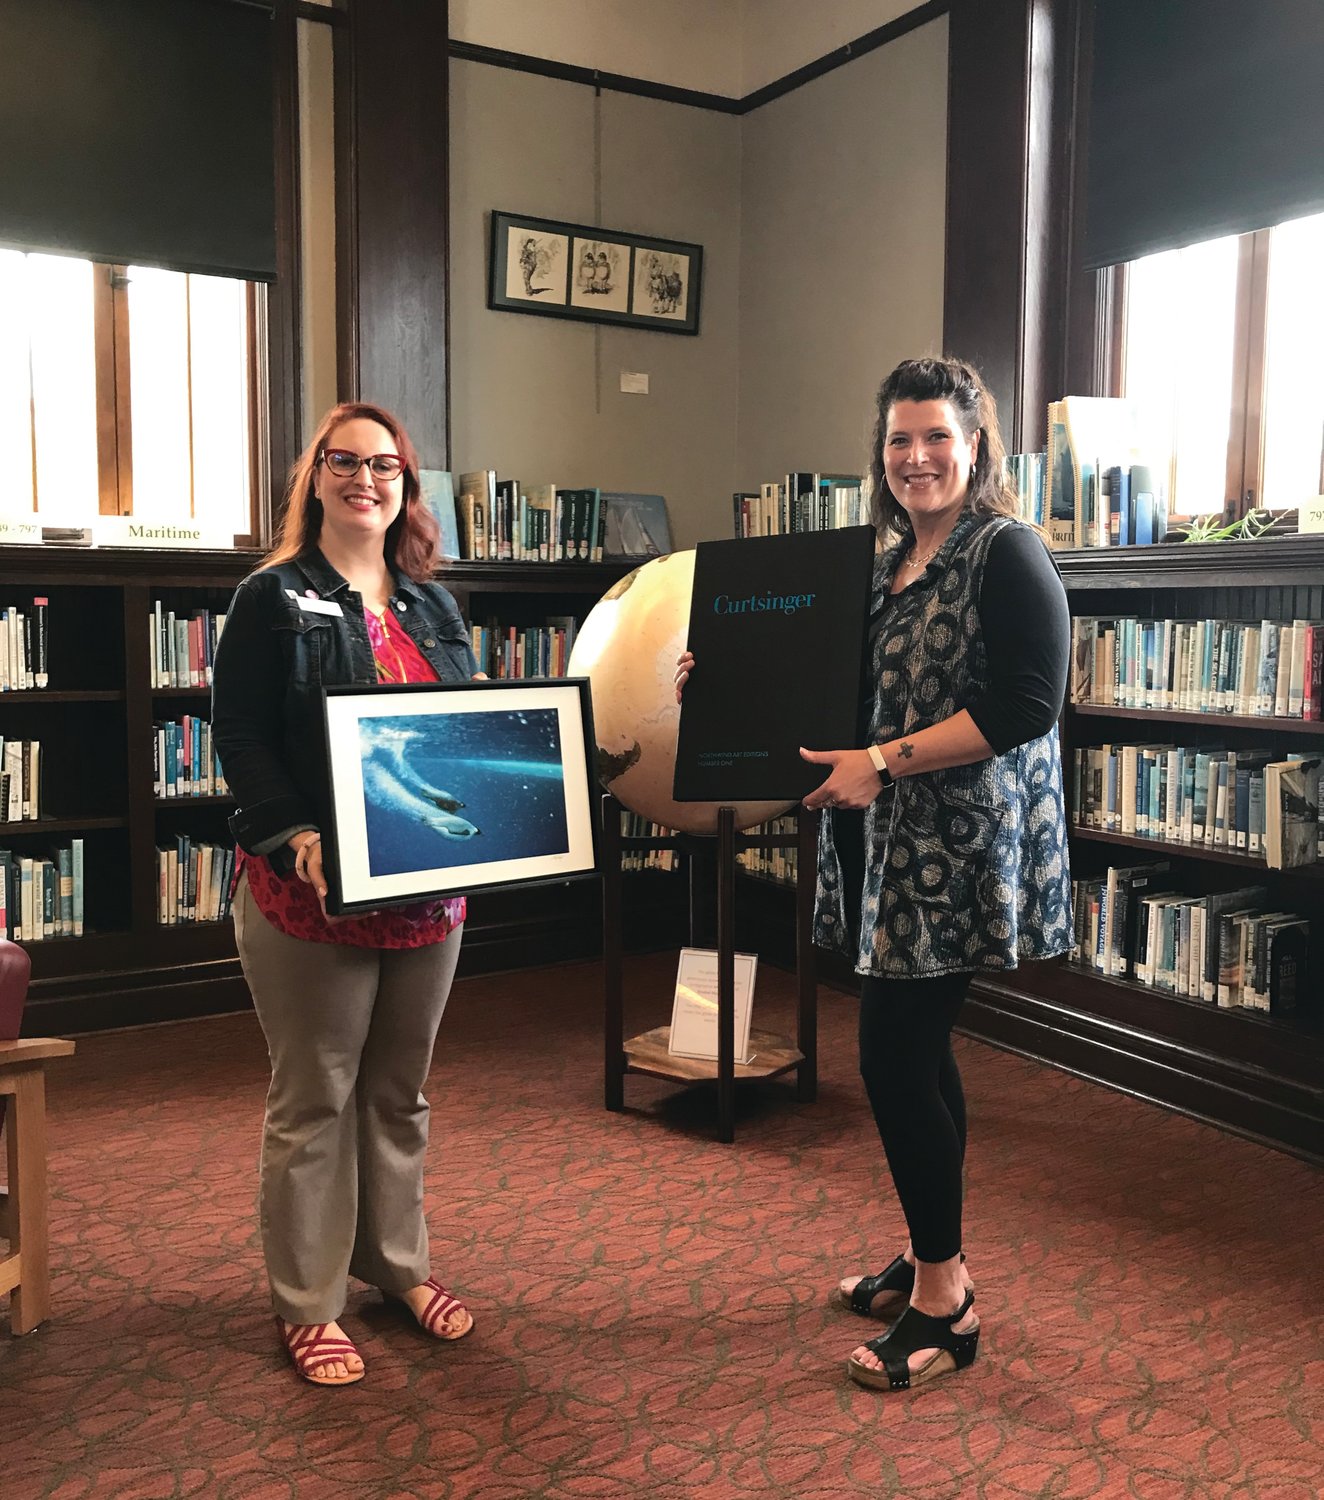 Library Director Melody Sky Weaver poses with the recently donated Curtsinger Portfolio art as executive director Teresa Verraes presents the framed pieces to her at the Port Townsend Public Library.